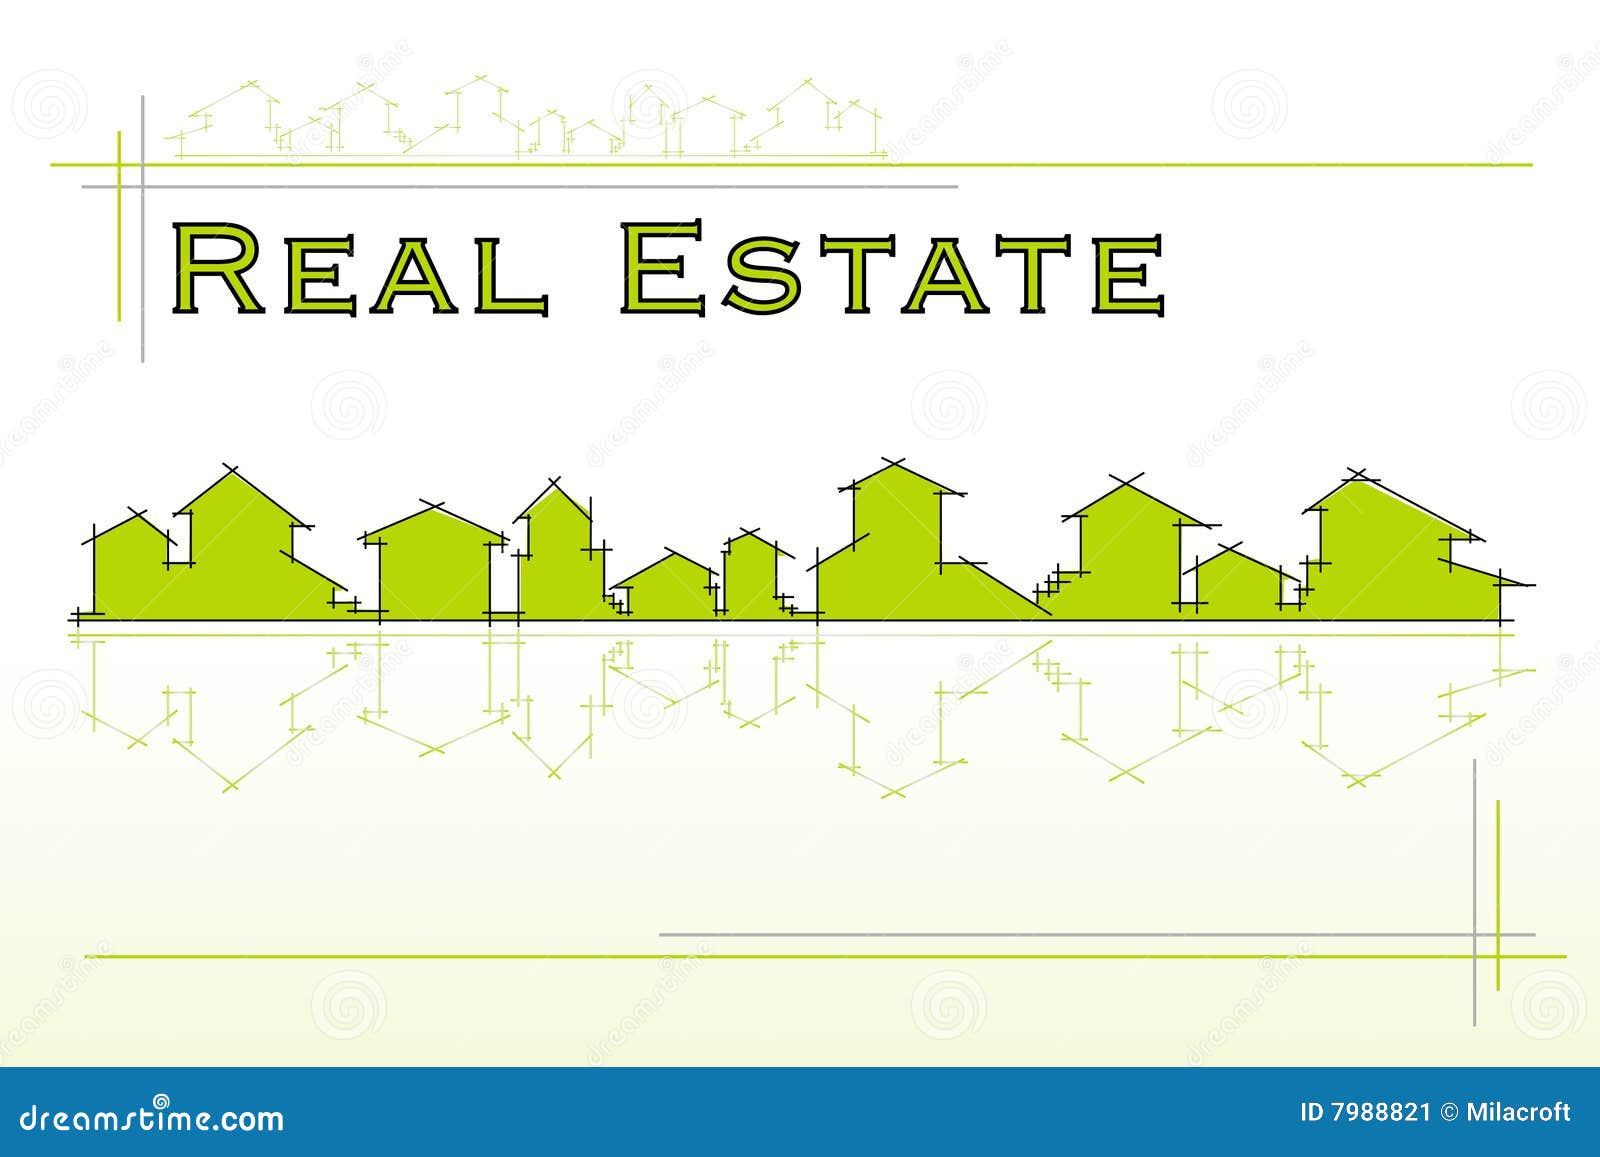 Real Estate company. Project card, template  Vector illustration.